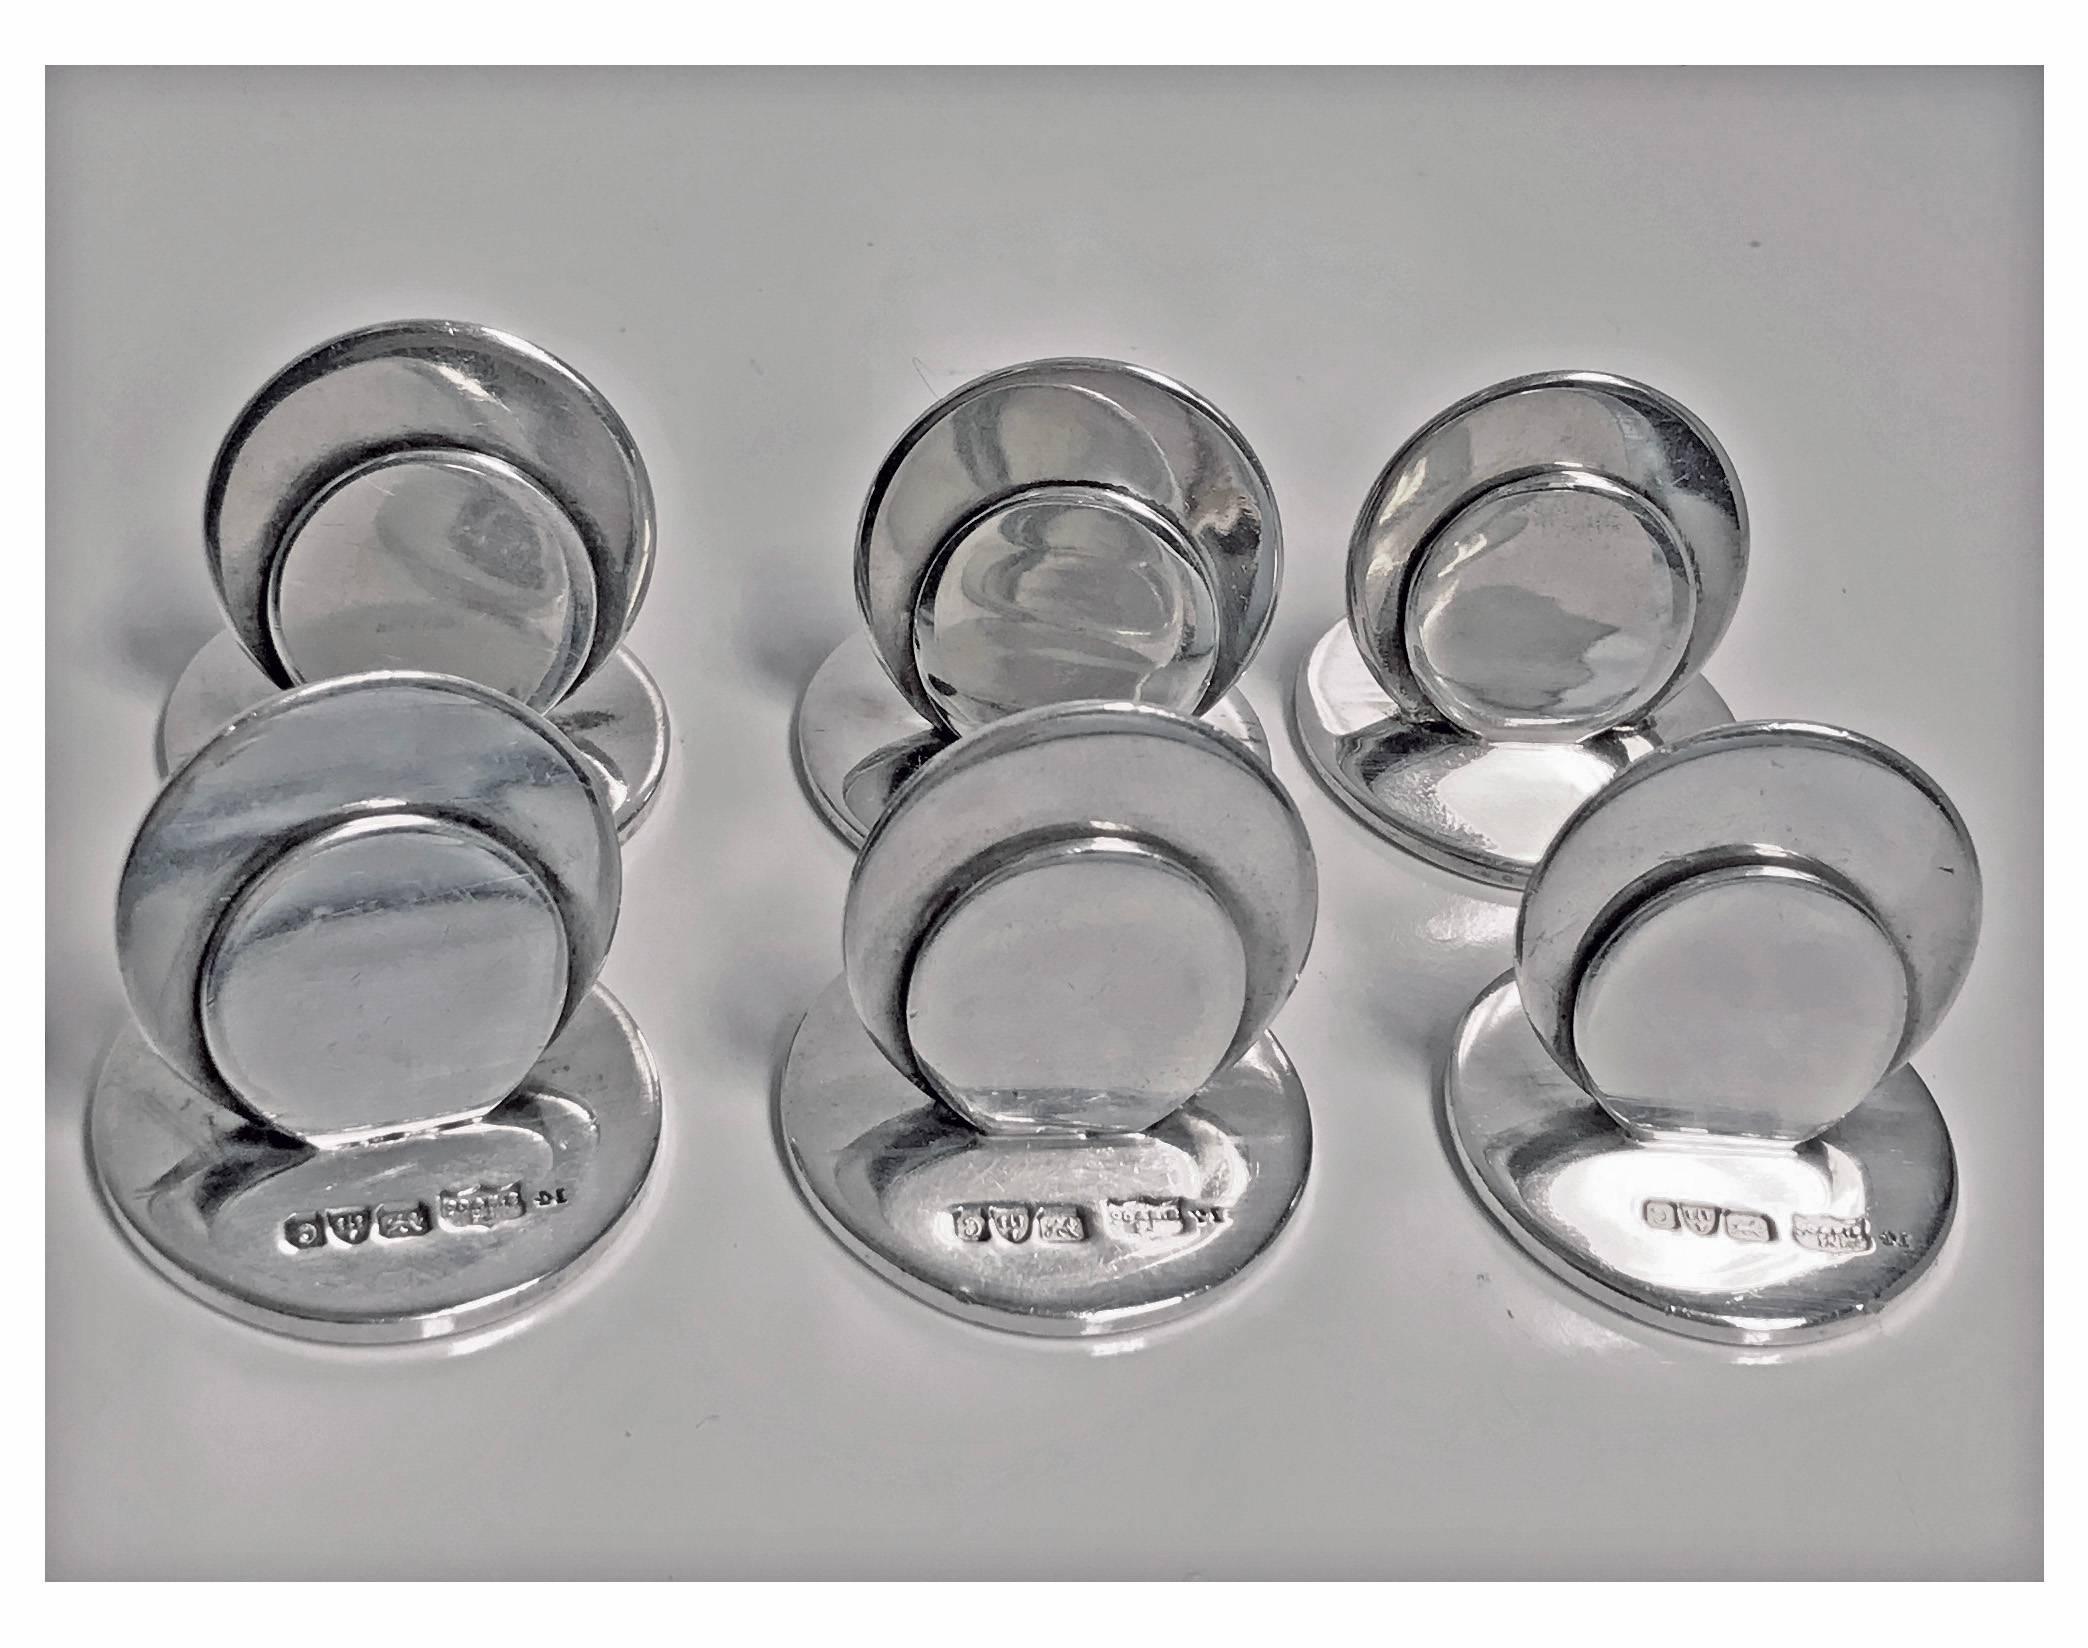 Set of six antique silver menu place card holders, London 1903-5, Sampson Mordan Co. Each of a plain circular disc like base, surmounted with similar smaller and larger fitment holders for cards. Each fully hallmarked for Sampson Mordan Co with a